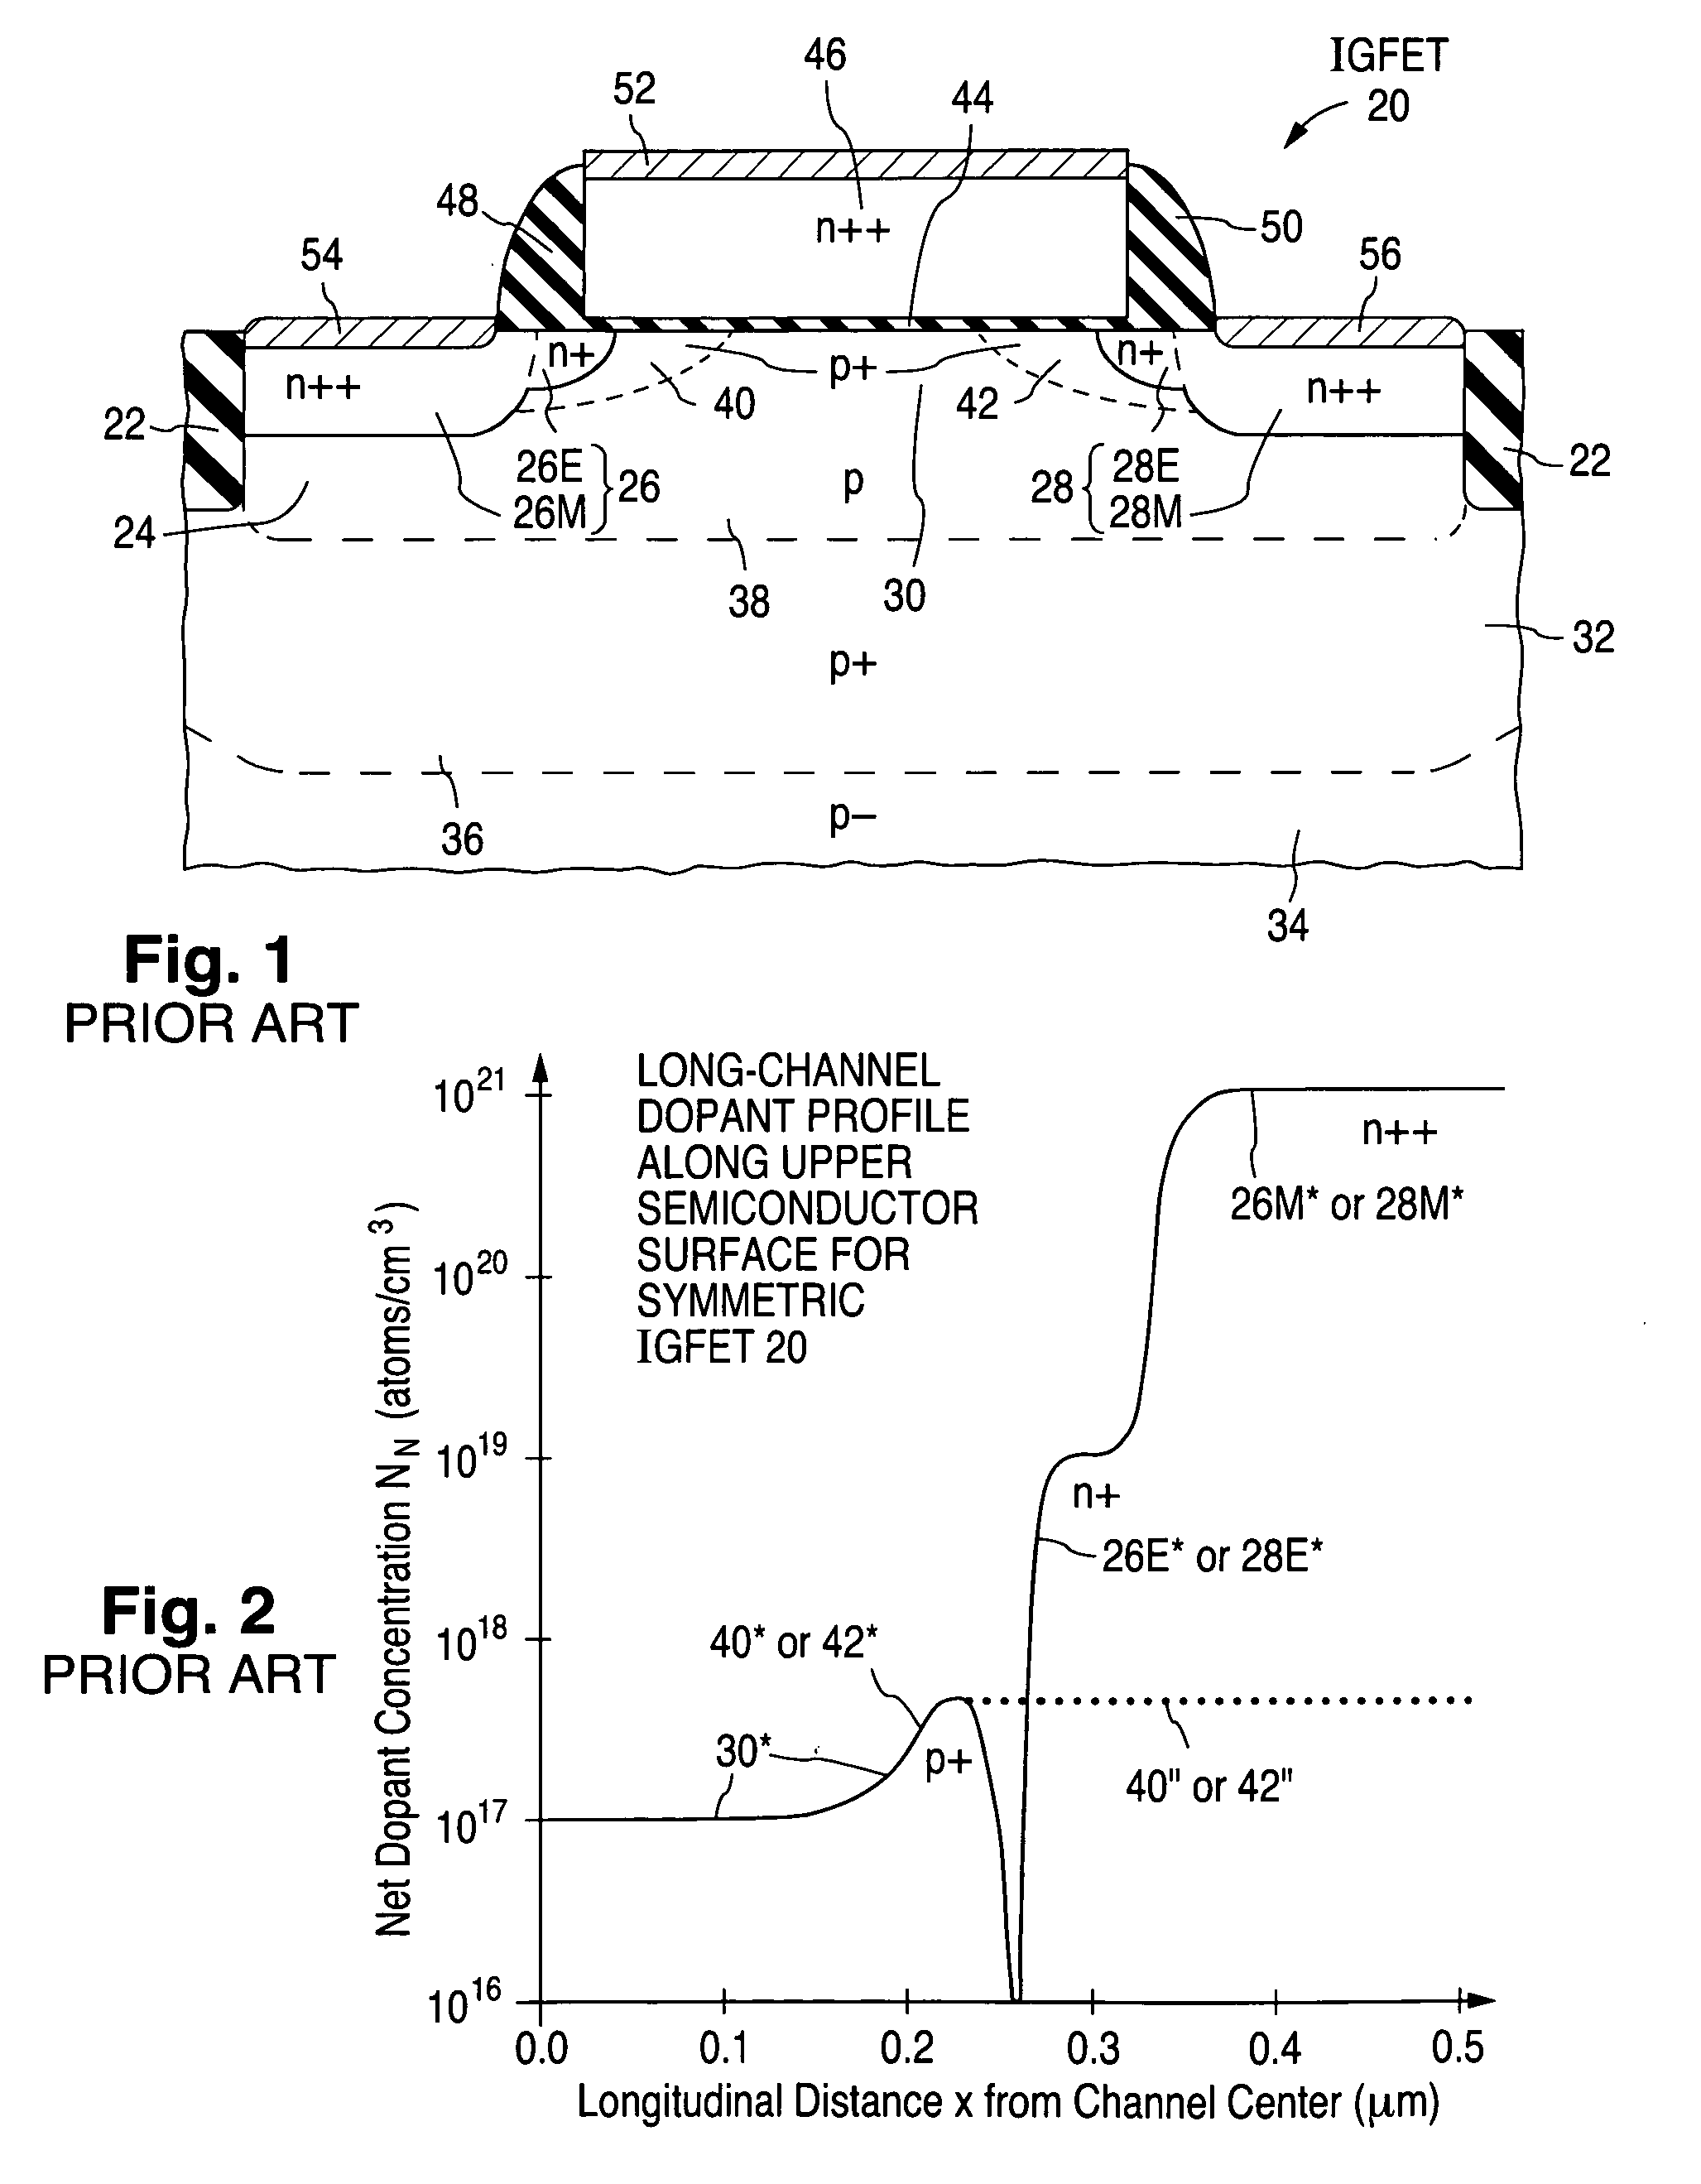 Semiconductor structure in which source and drain extensions of field-effect transistor are defined with different dopants